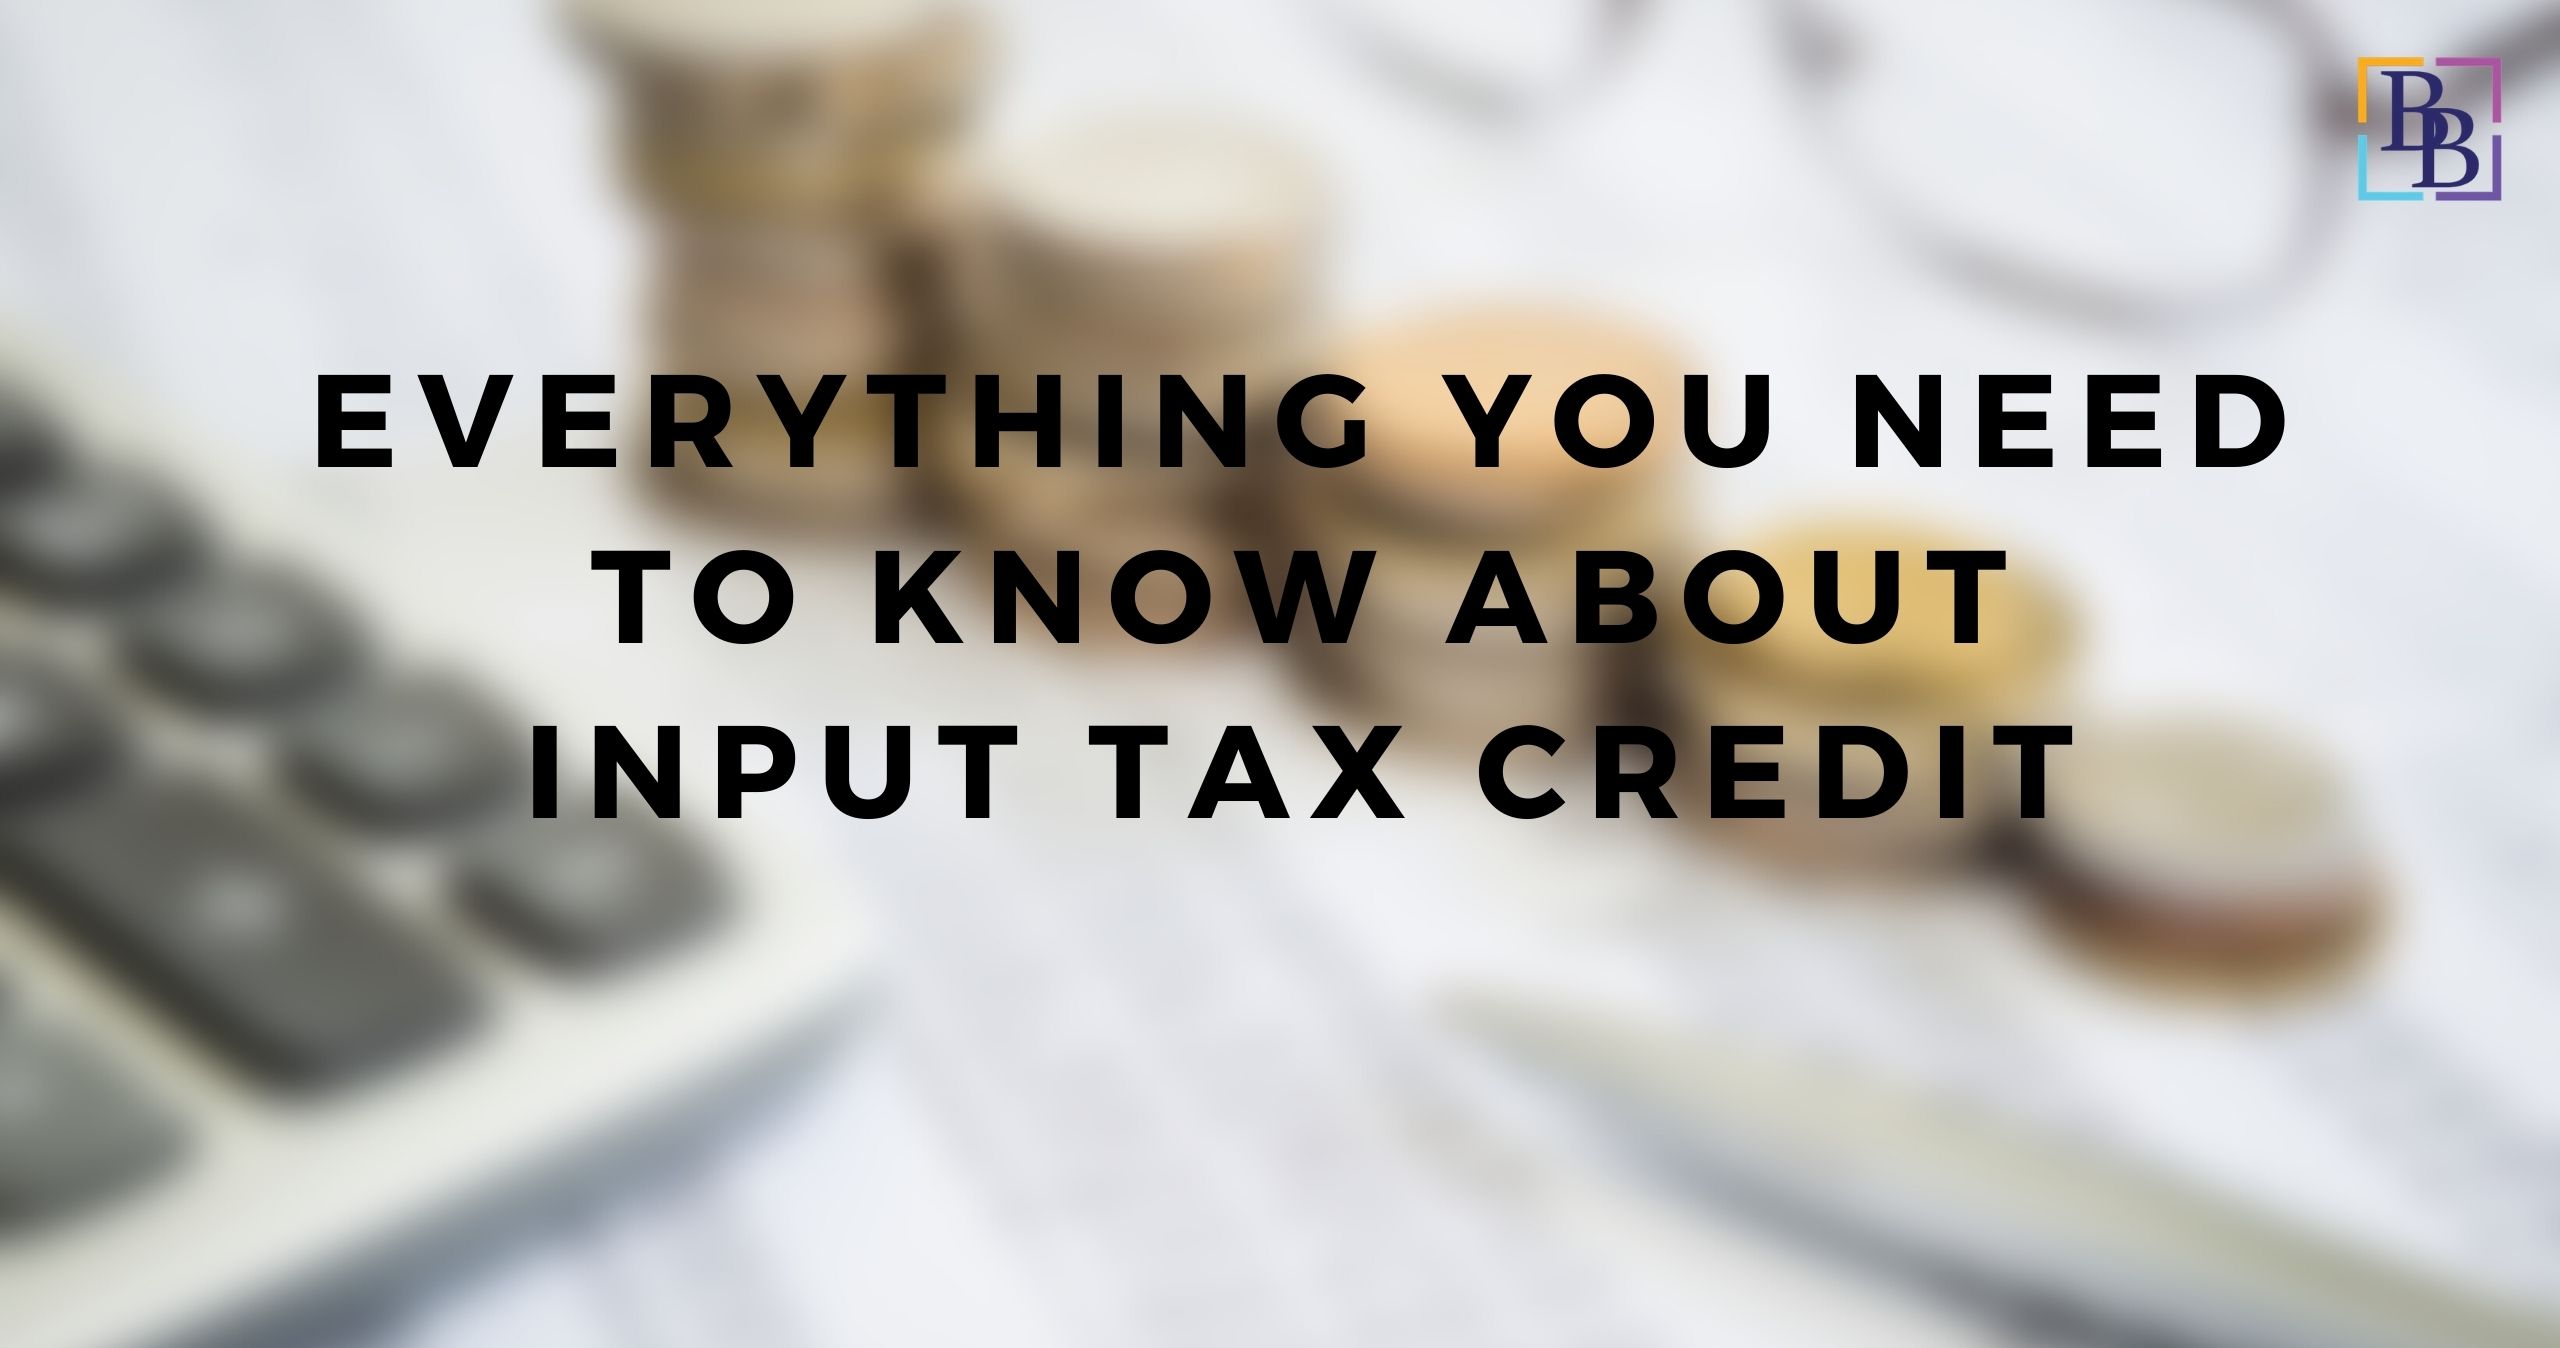 Everything you need to know about Input Tax Credits (ITC)